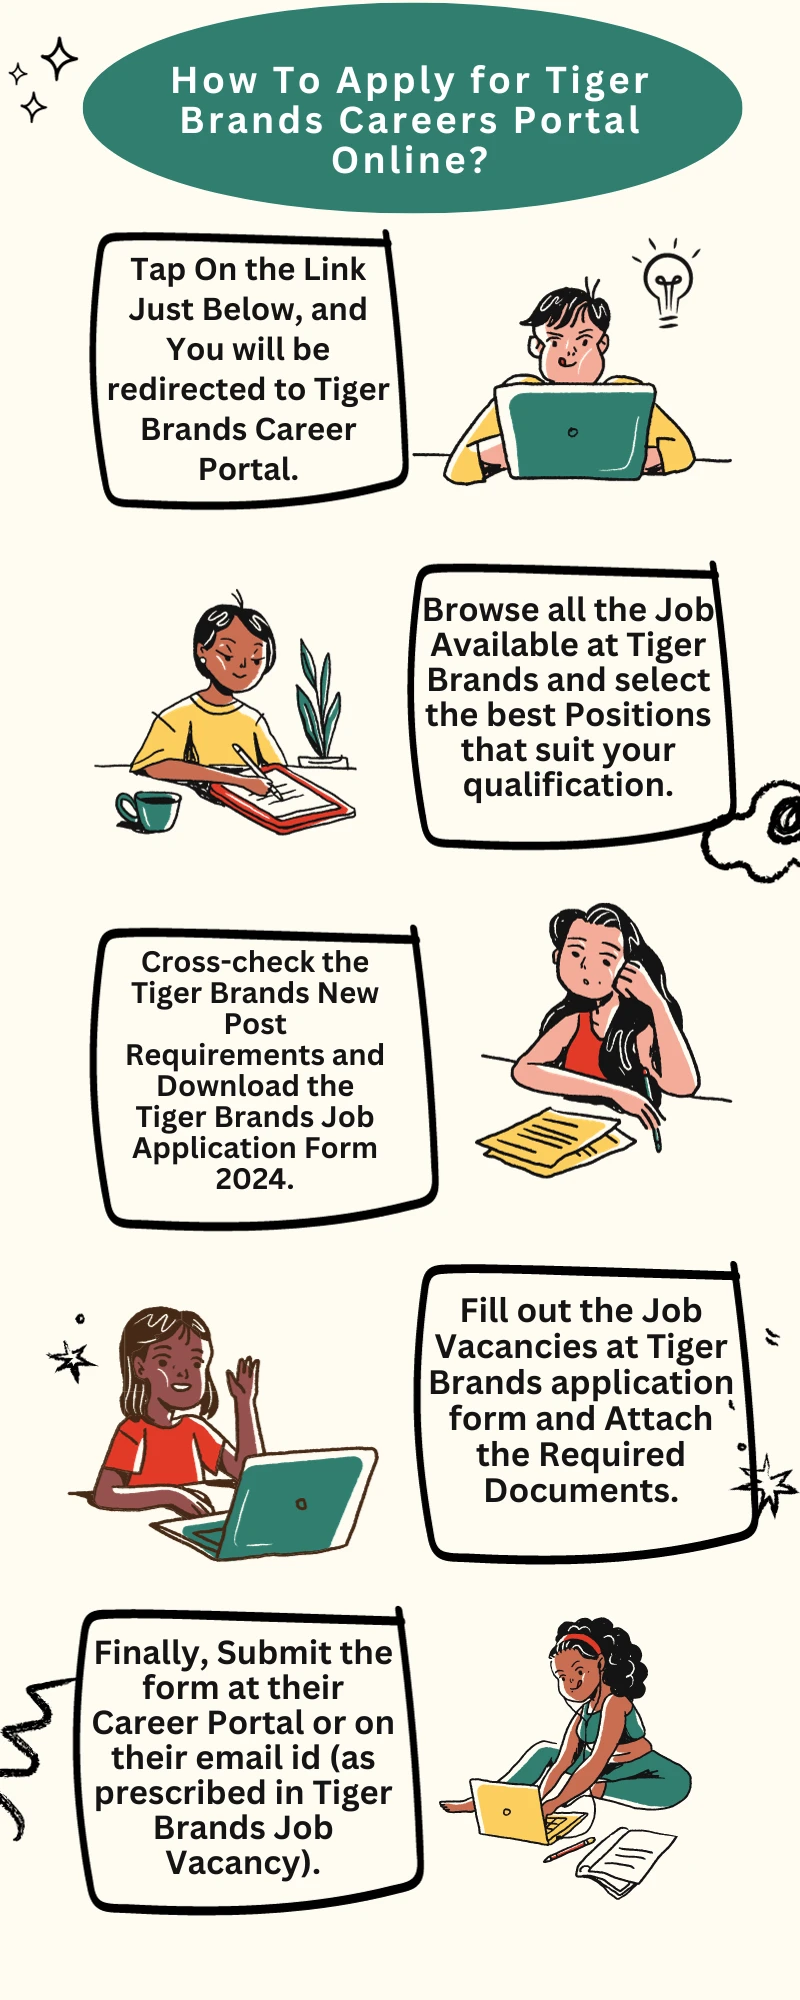 How To Apply for Tiger Brands Careers Portal Online?